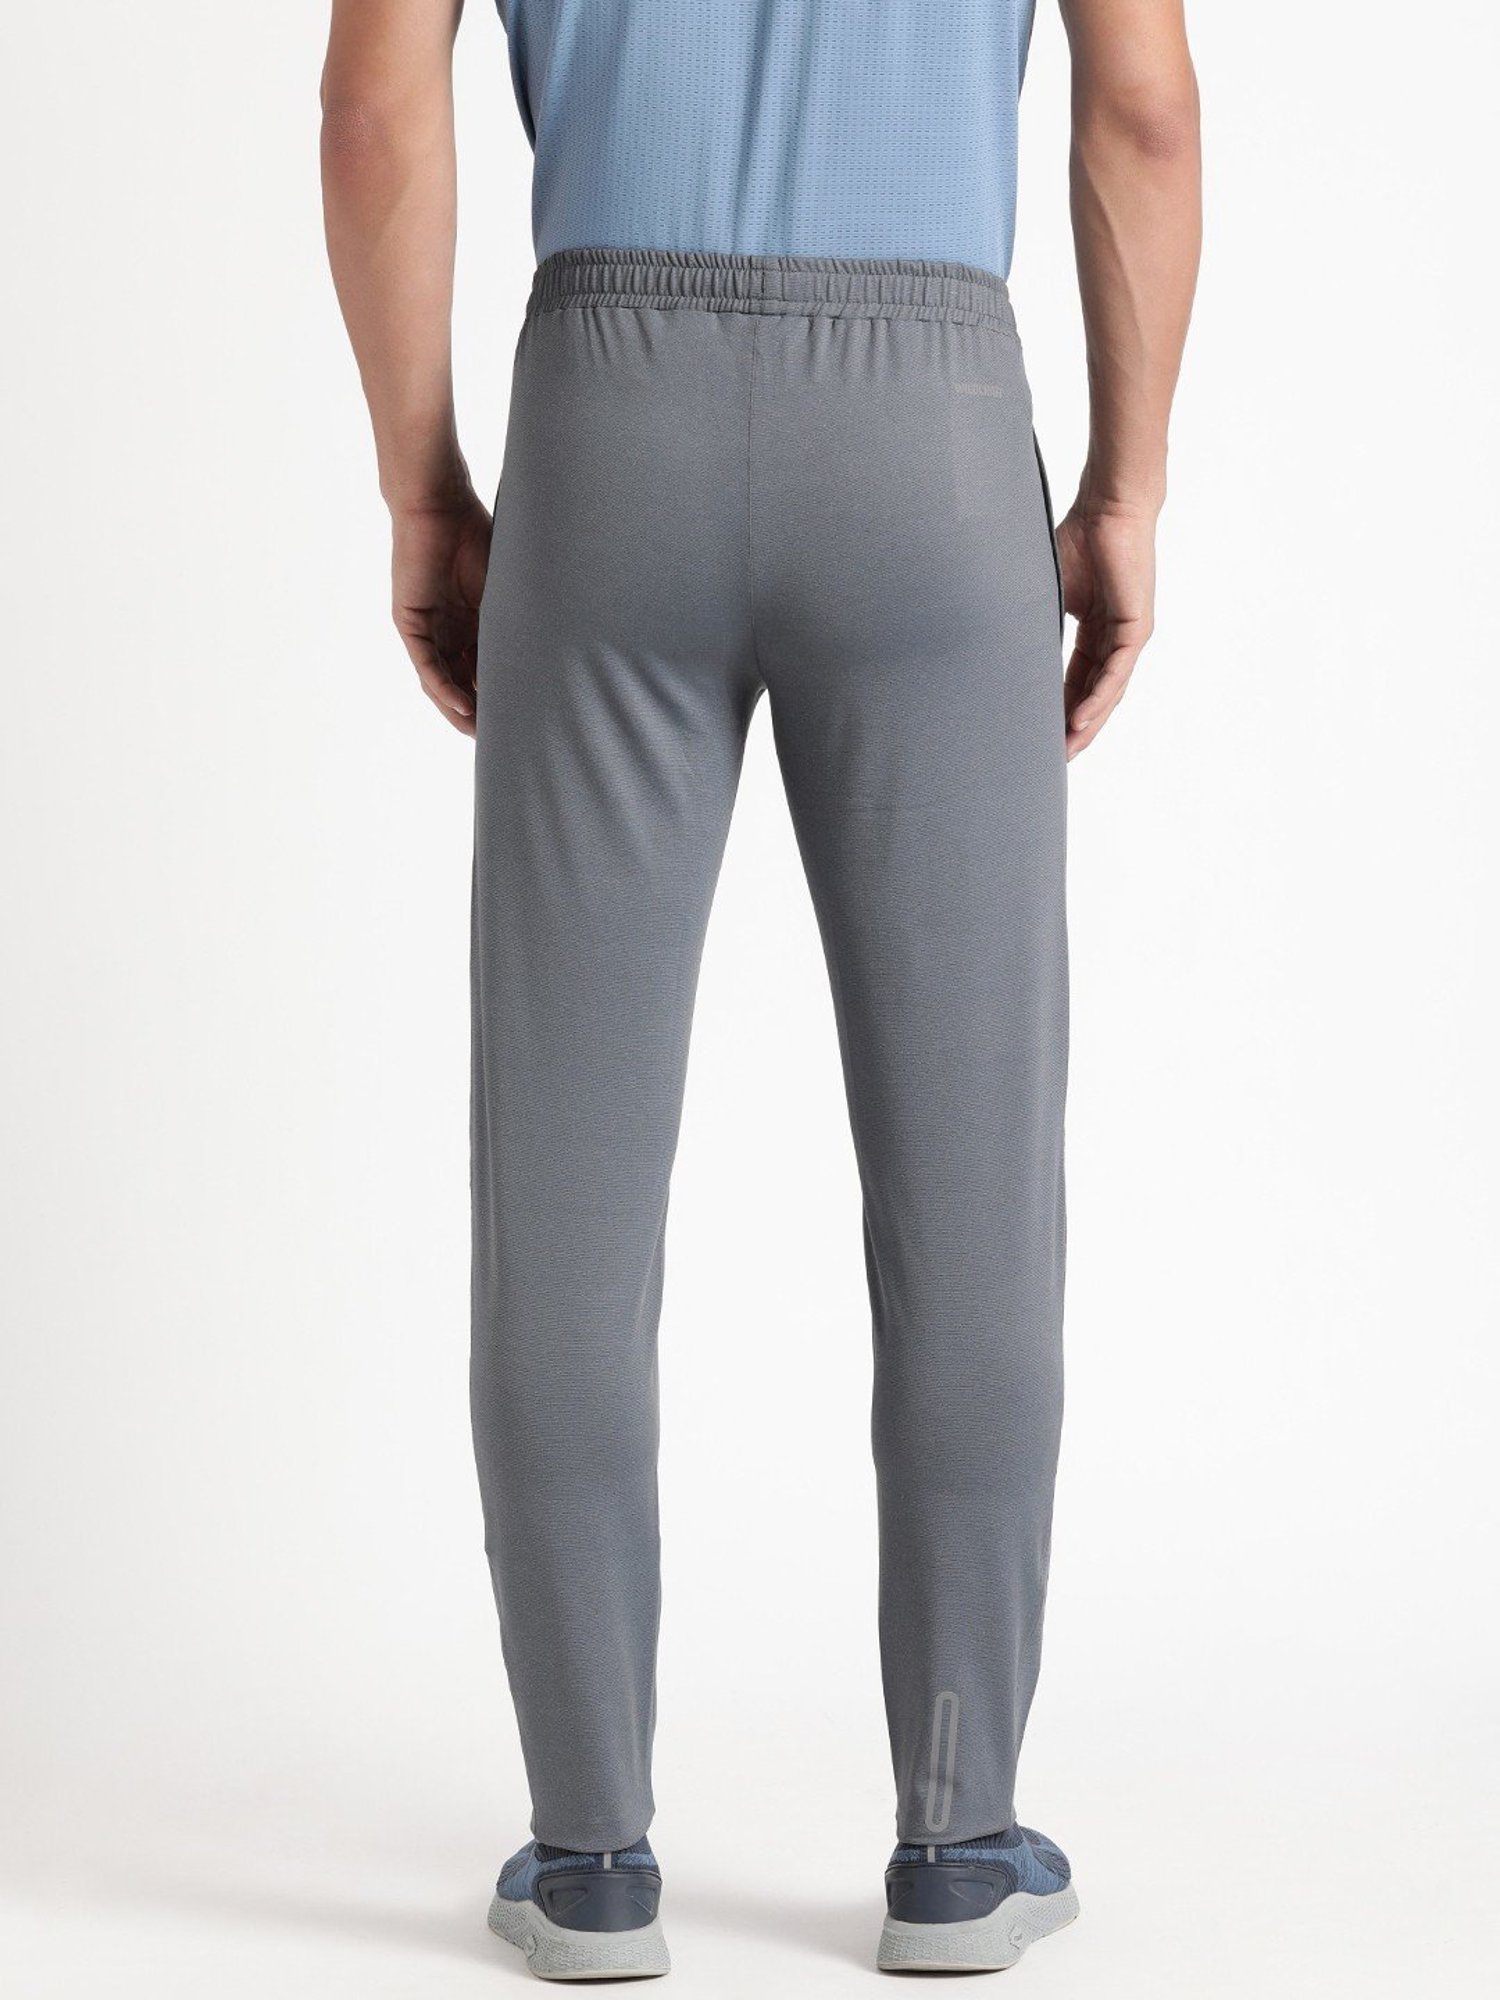 Wildcraft Mens Off White Regular Track Pant Buy Wildcraft Mens Off White  Regular Track Pant Online at Best Price in India  NykaaMan